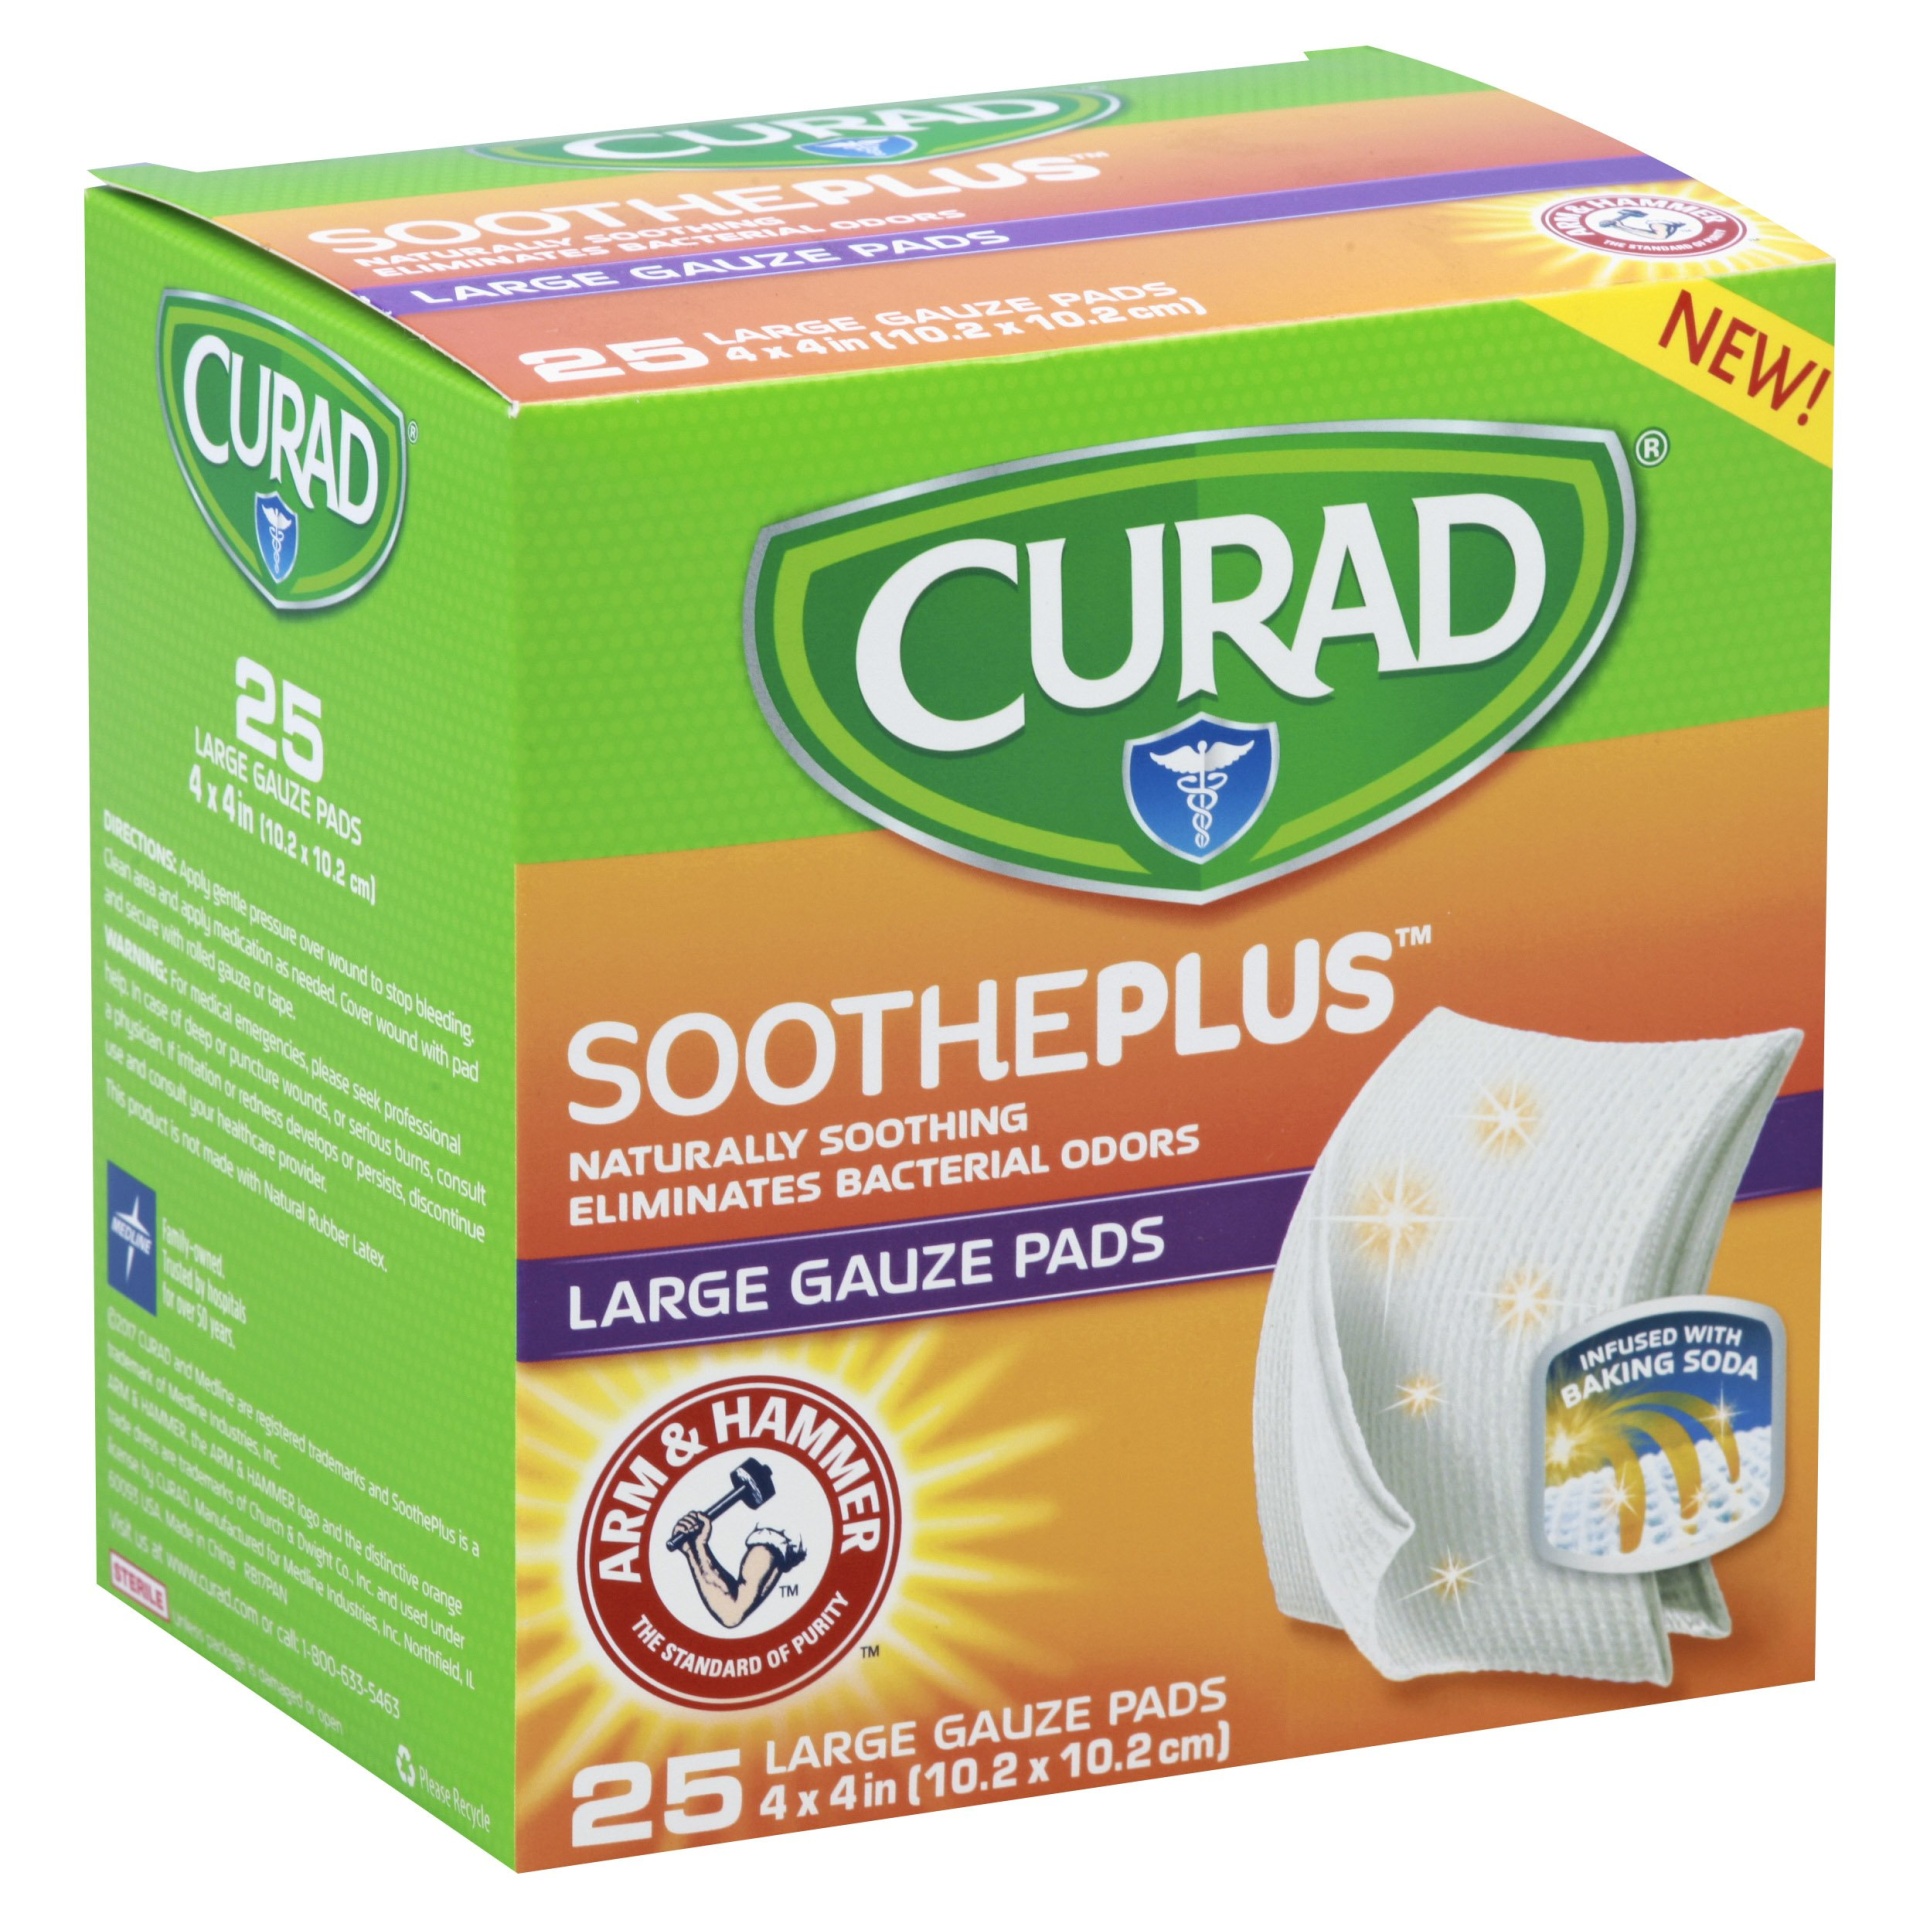 slide 1 of 1, Curad Arm & Hammer Soothe Plus Large Gauze Pads 4x4, 25 ct